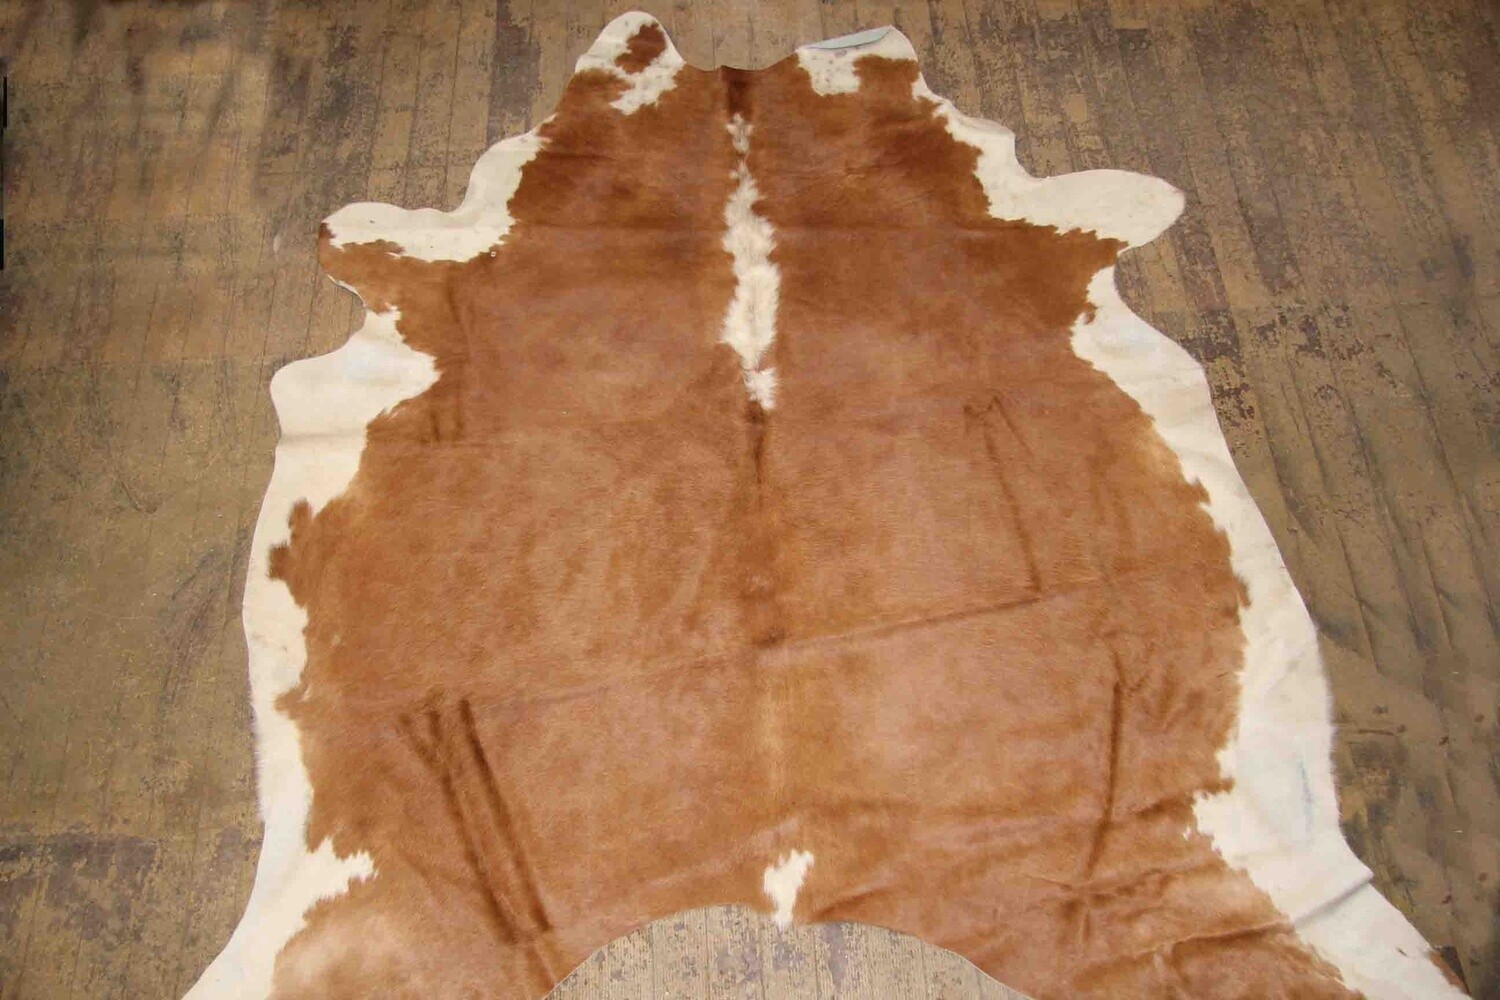 COW HIDE RUG NATURAL BROWN OR BLACK SOLID OR WITH WHITE ASSORTED #1 A QUALITY 38ft2 AVERAGE 28124